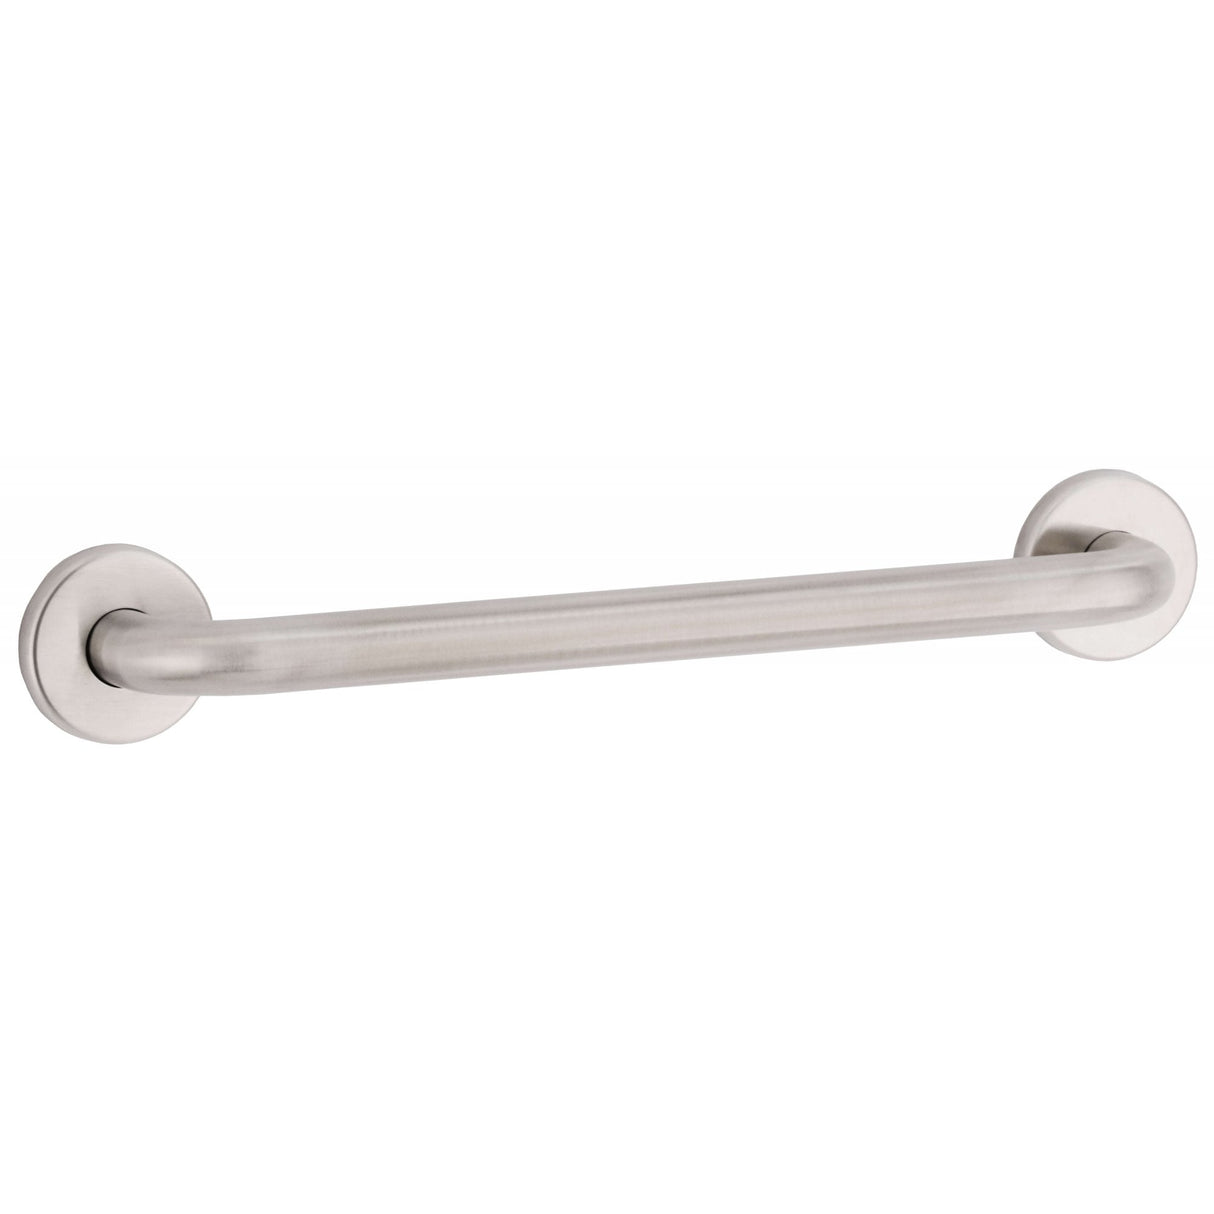 Stainless Steel Grab Bar with 32mm Bar Diameter (Various Lengths)